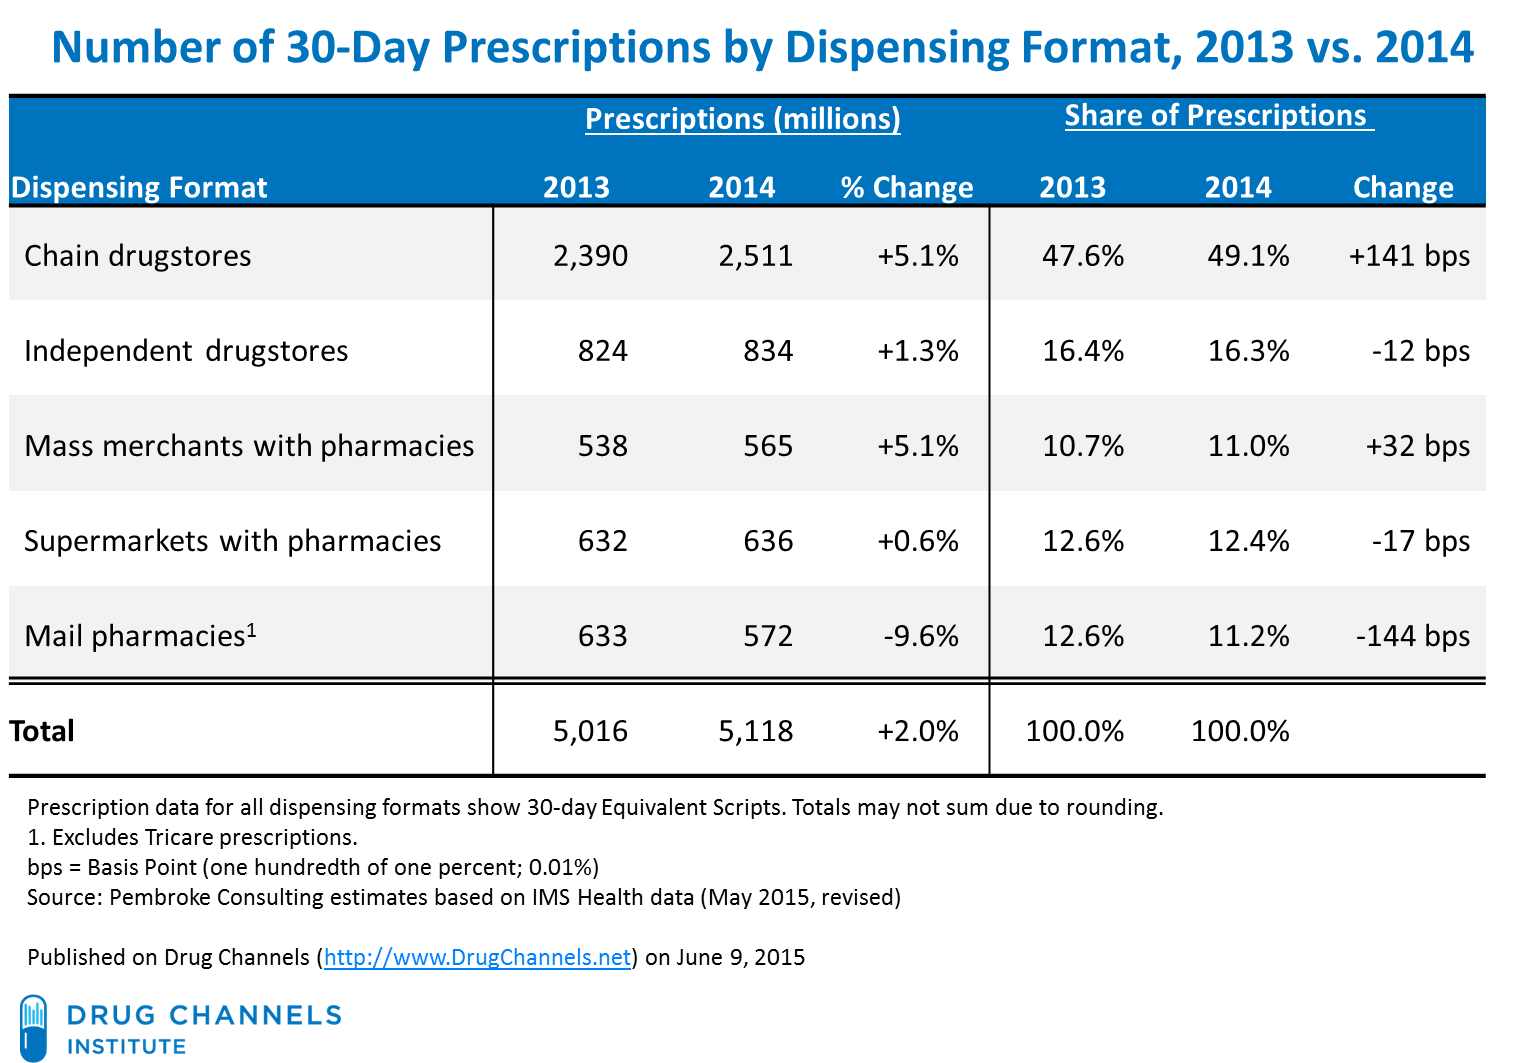 Number_of_30-Day_Prescriptions_by_Dispensing_Format_2013vs2014.png